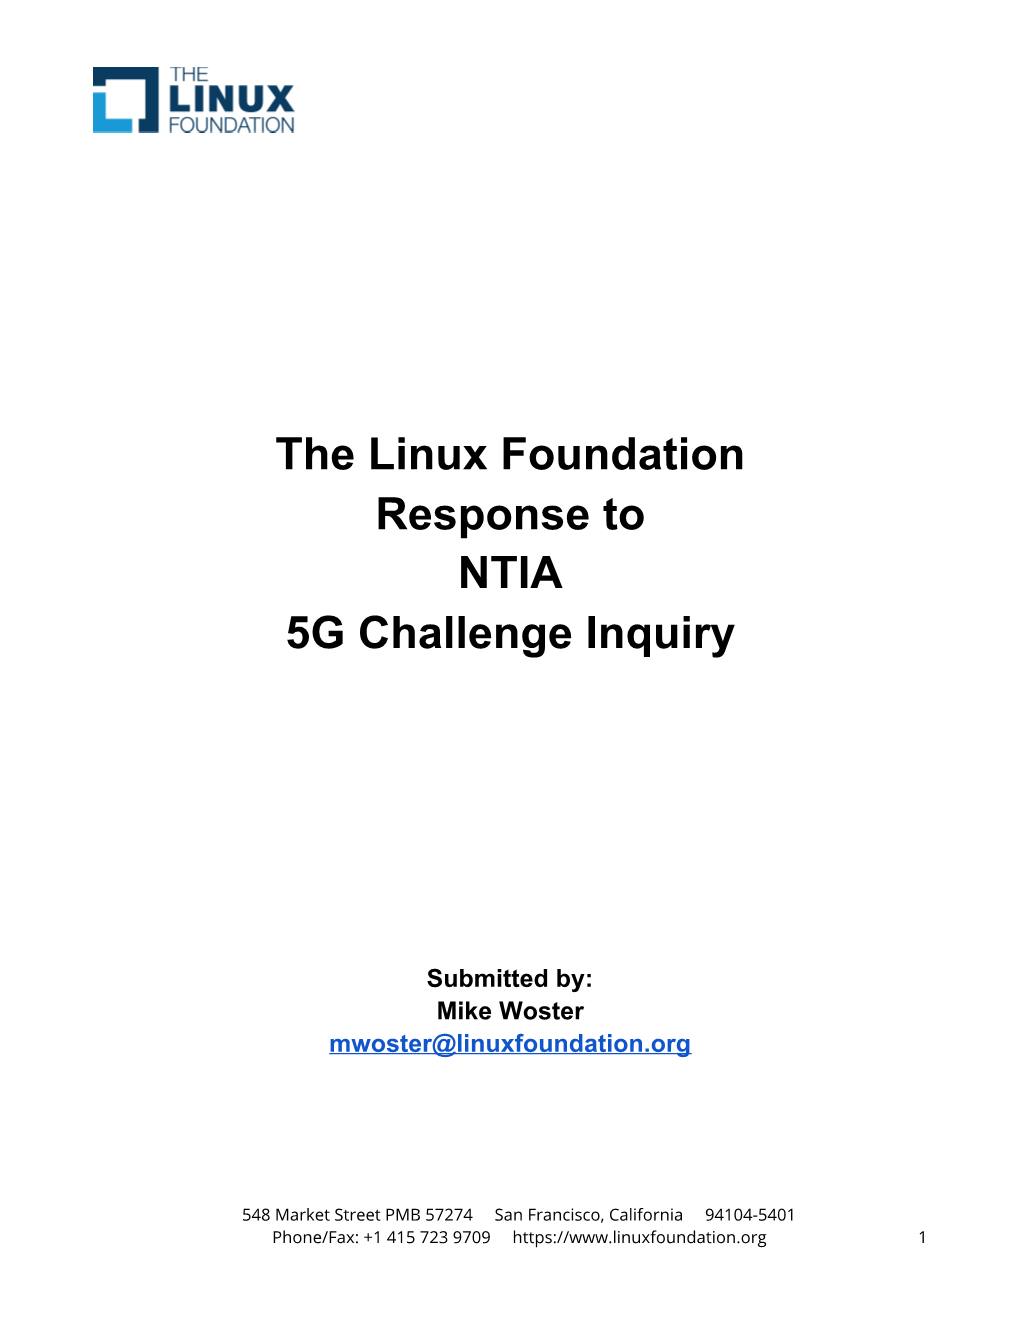 The Linux Foundation Response to NTIA 5G Challenge Inquiry